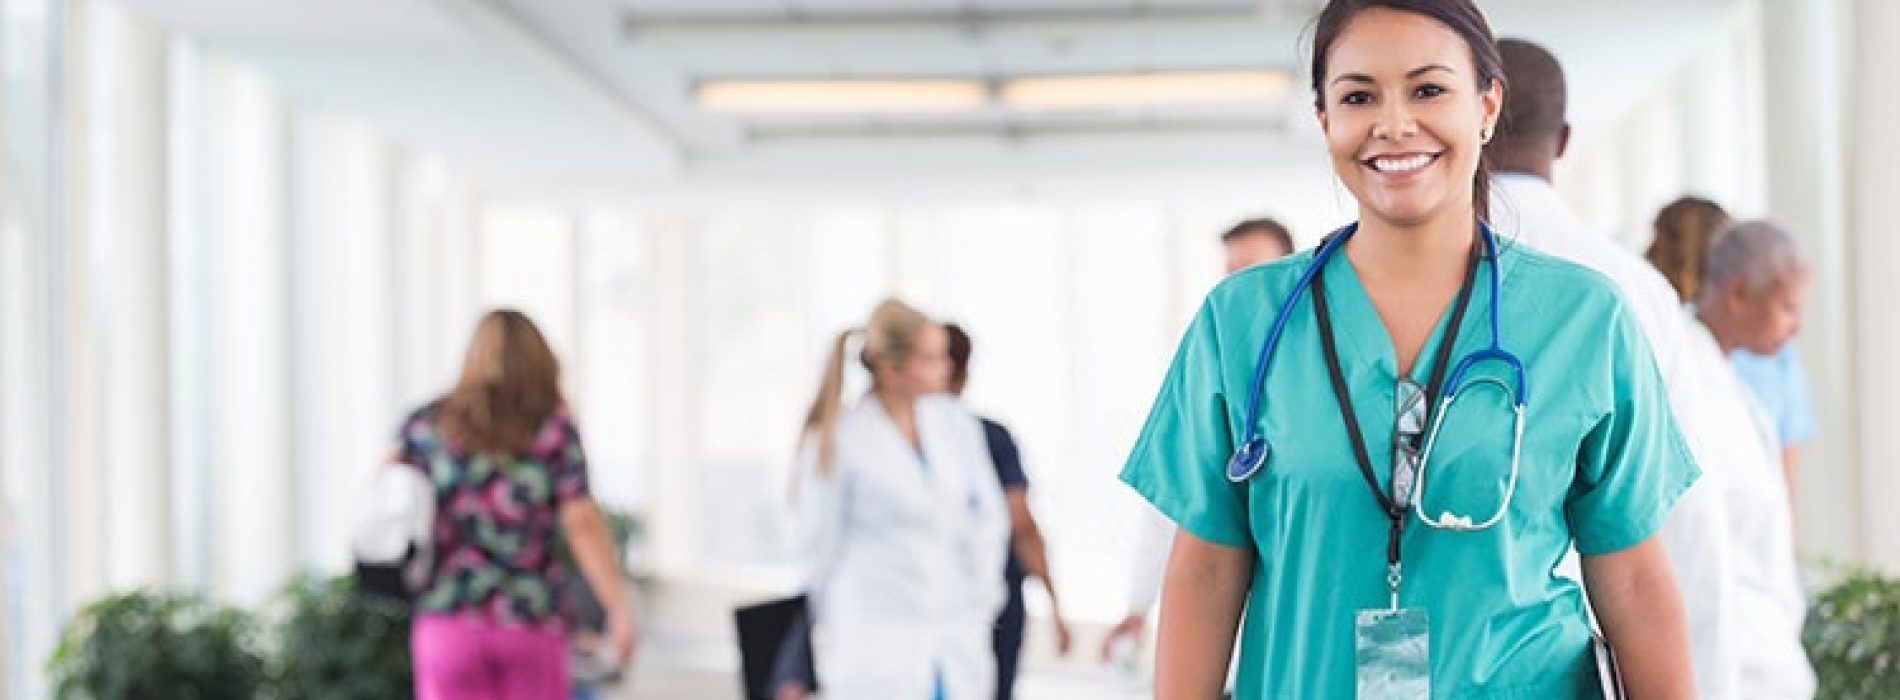 What Will Your Work Be With A Practical Nursing Degree?